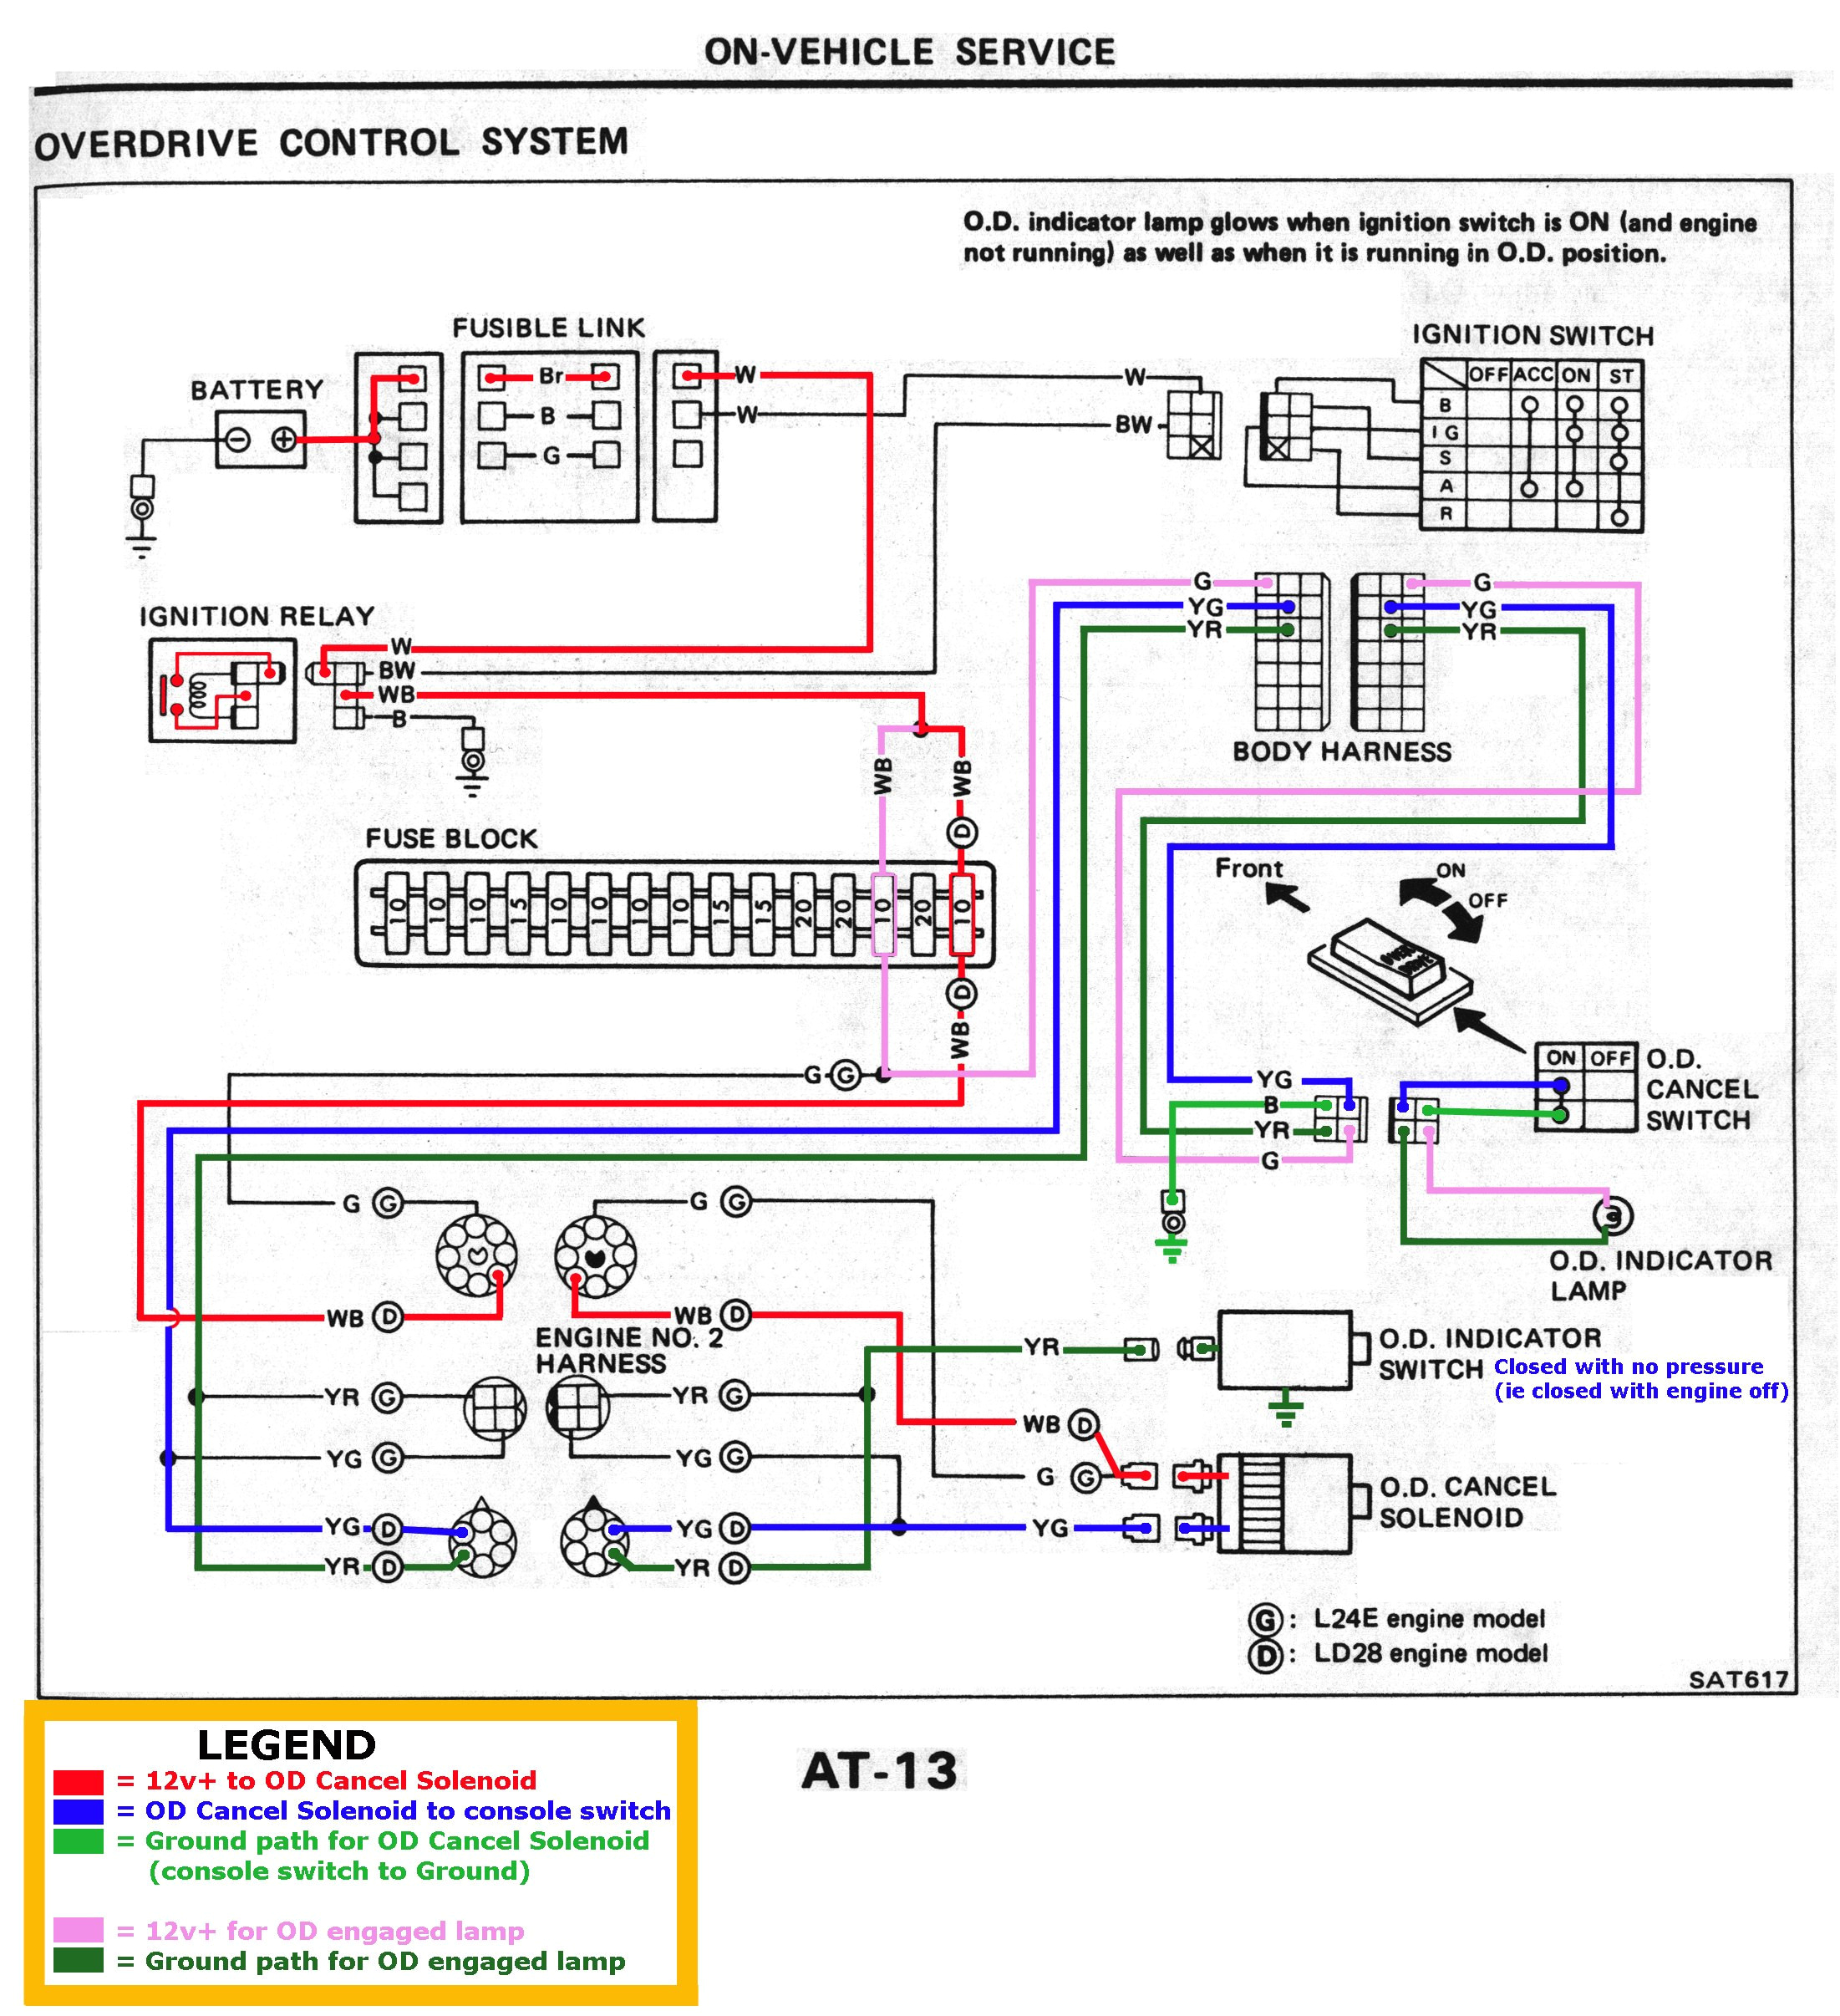 electrical schematic wiring color wiring diagram operations codes for electrical diagrams relay wiring